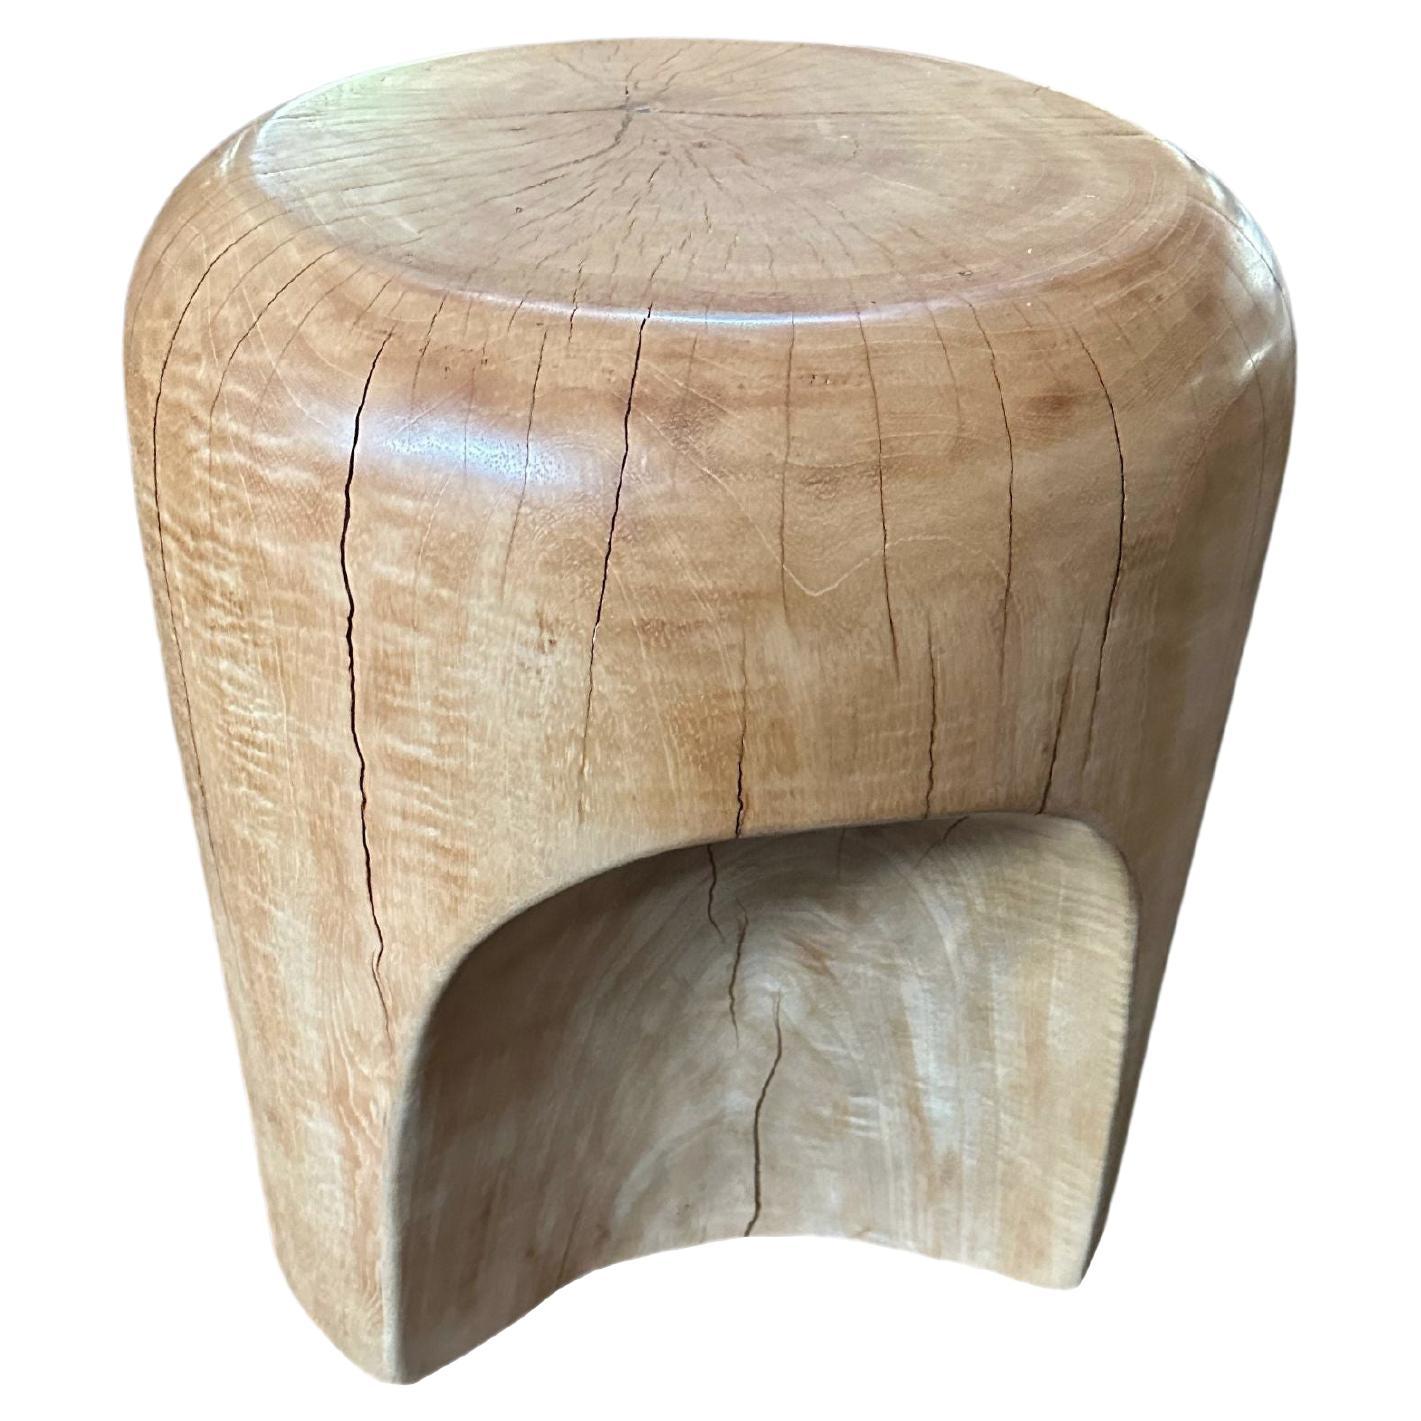 Sculptural Mango Wood Side Table, Hand-Crafted Modern Organic For Sale